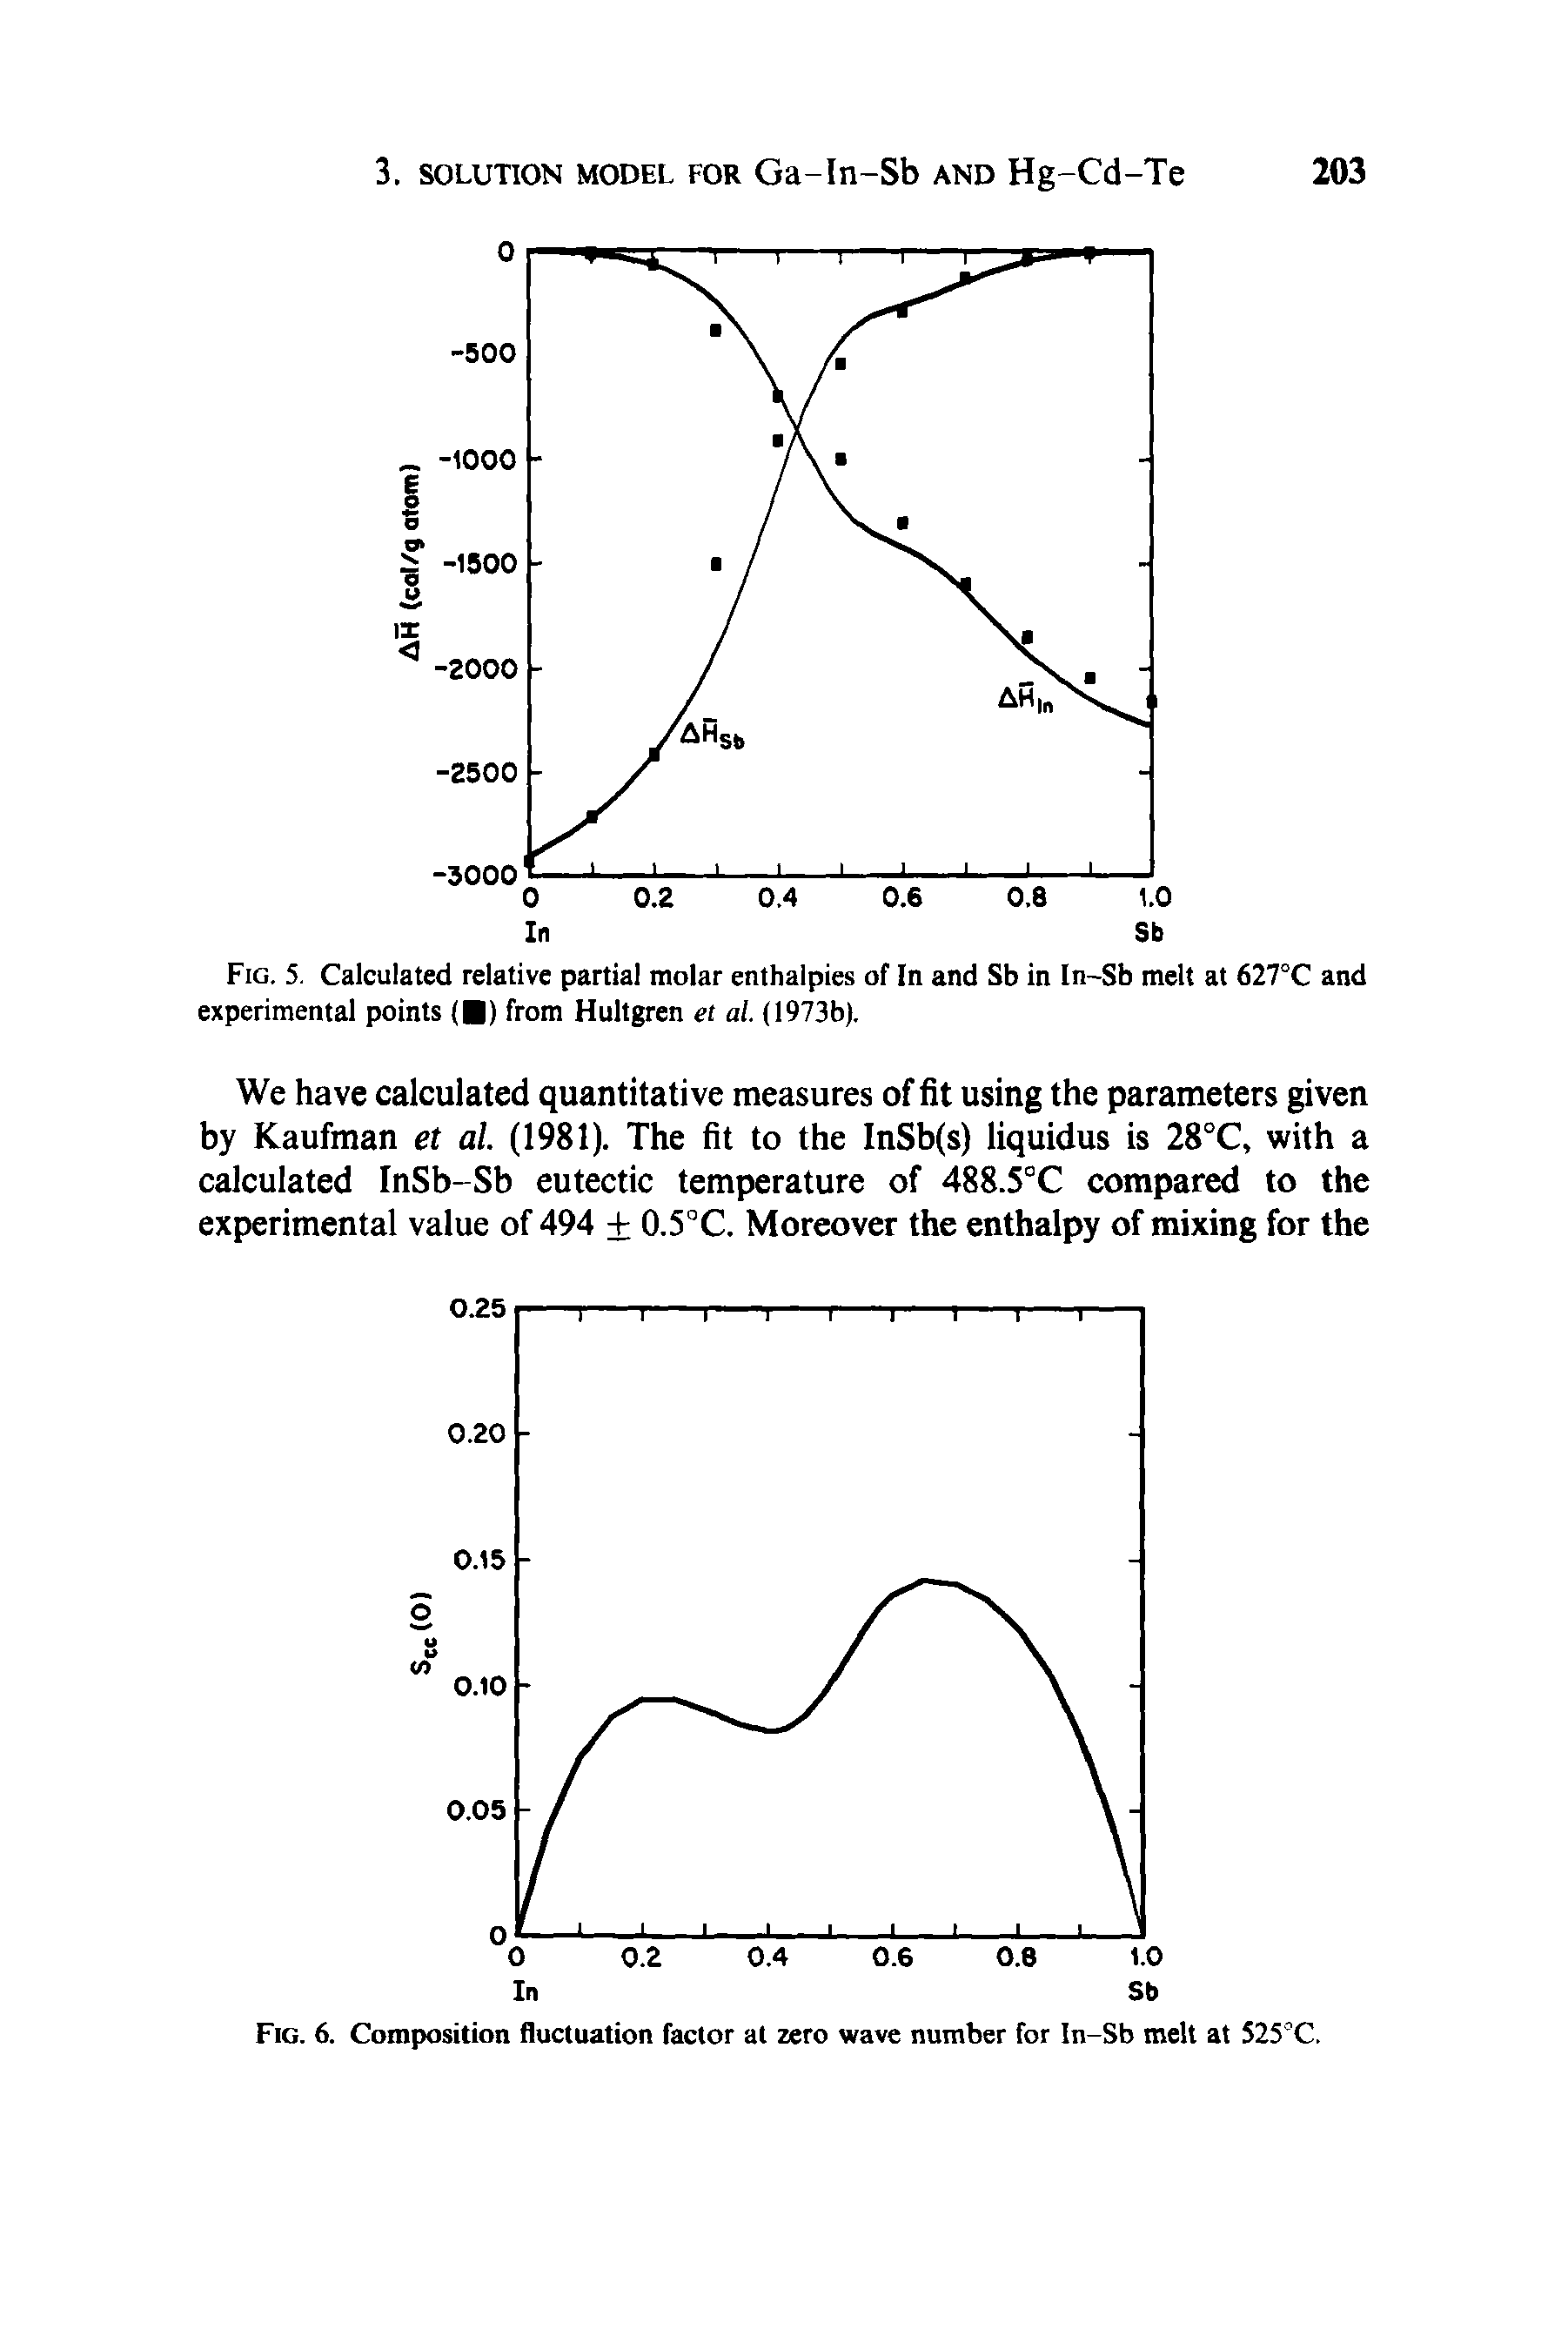 Fig. 5. Calculated relative partial molar enthalpies of In and Sb in In-Sb melt at 627°C and experimental points ( ) from Hultgren et al. (1973b).